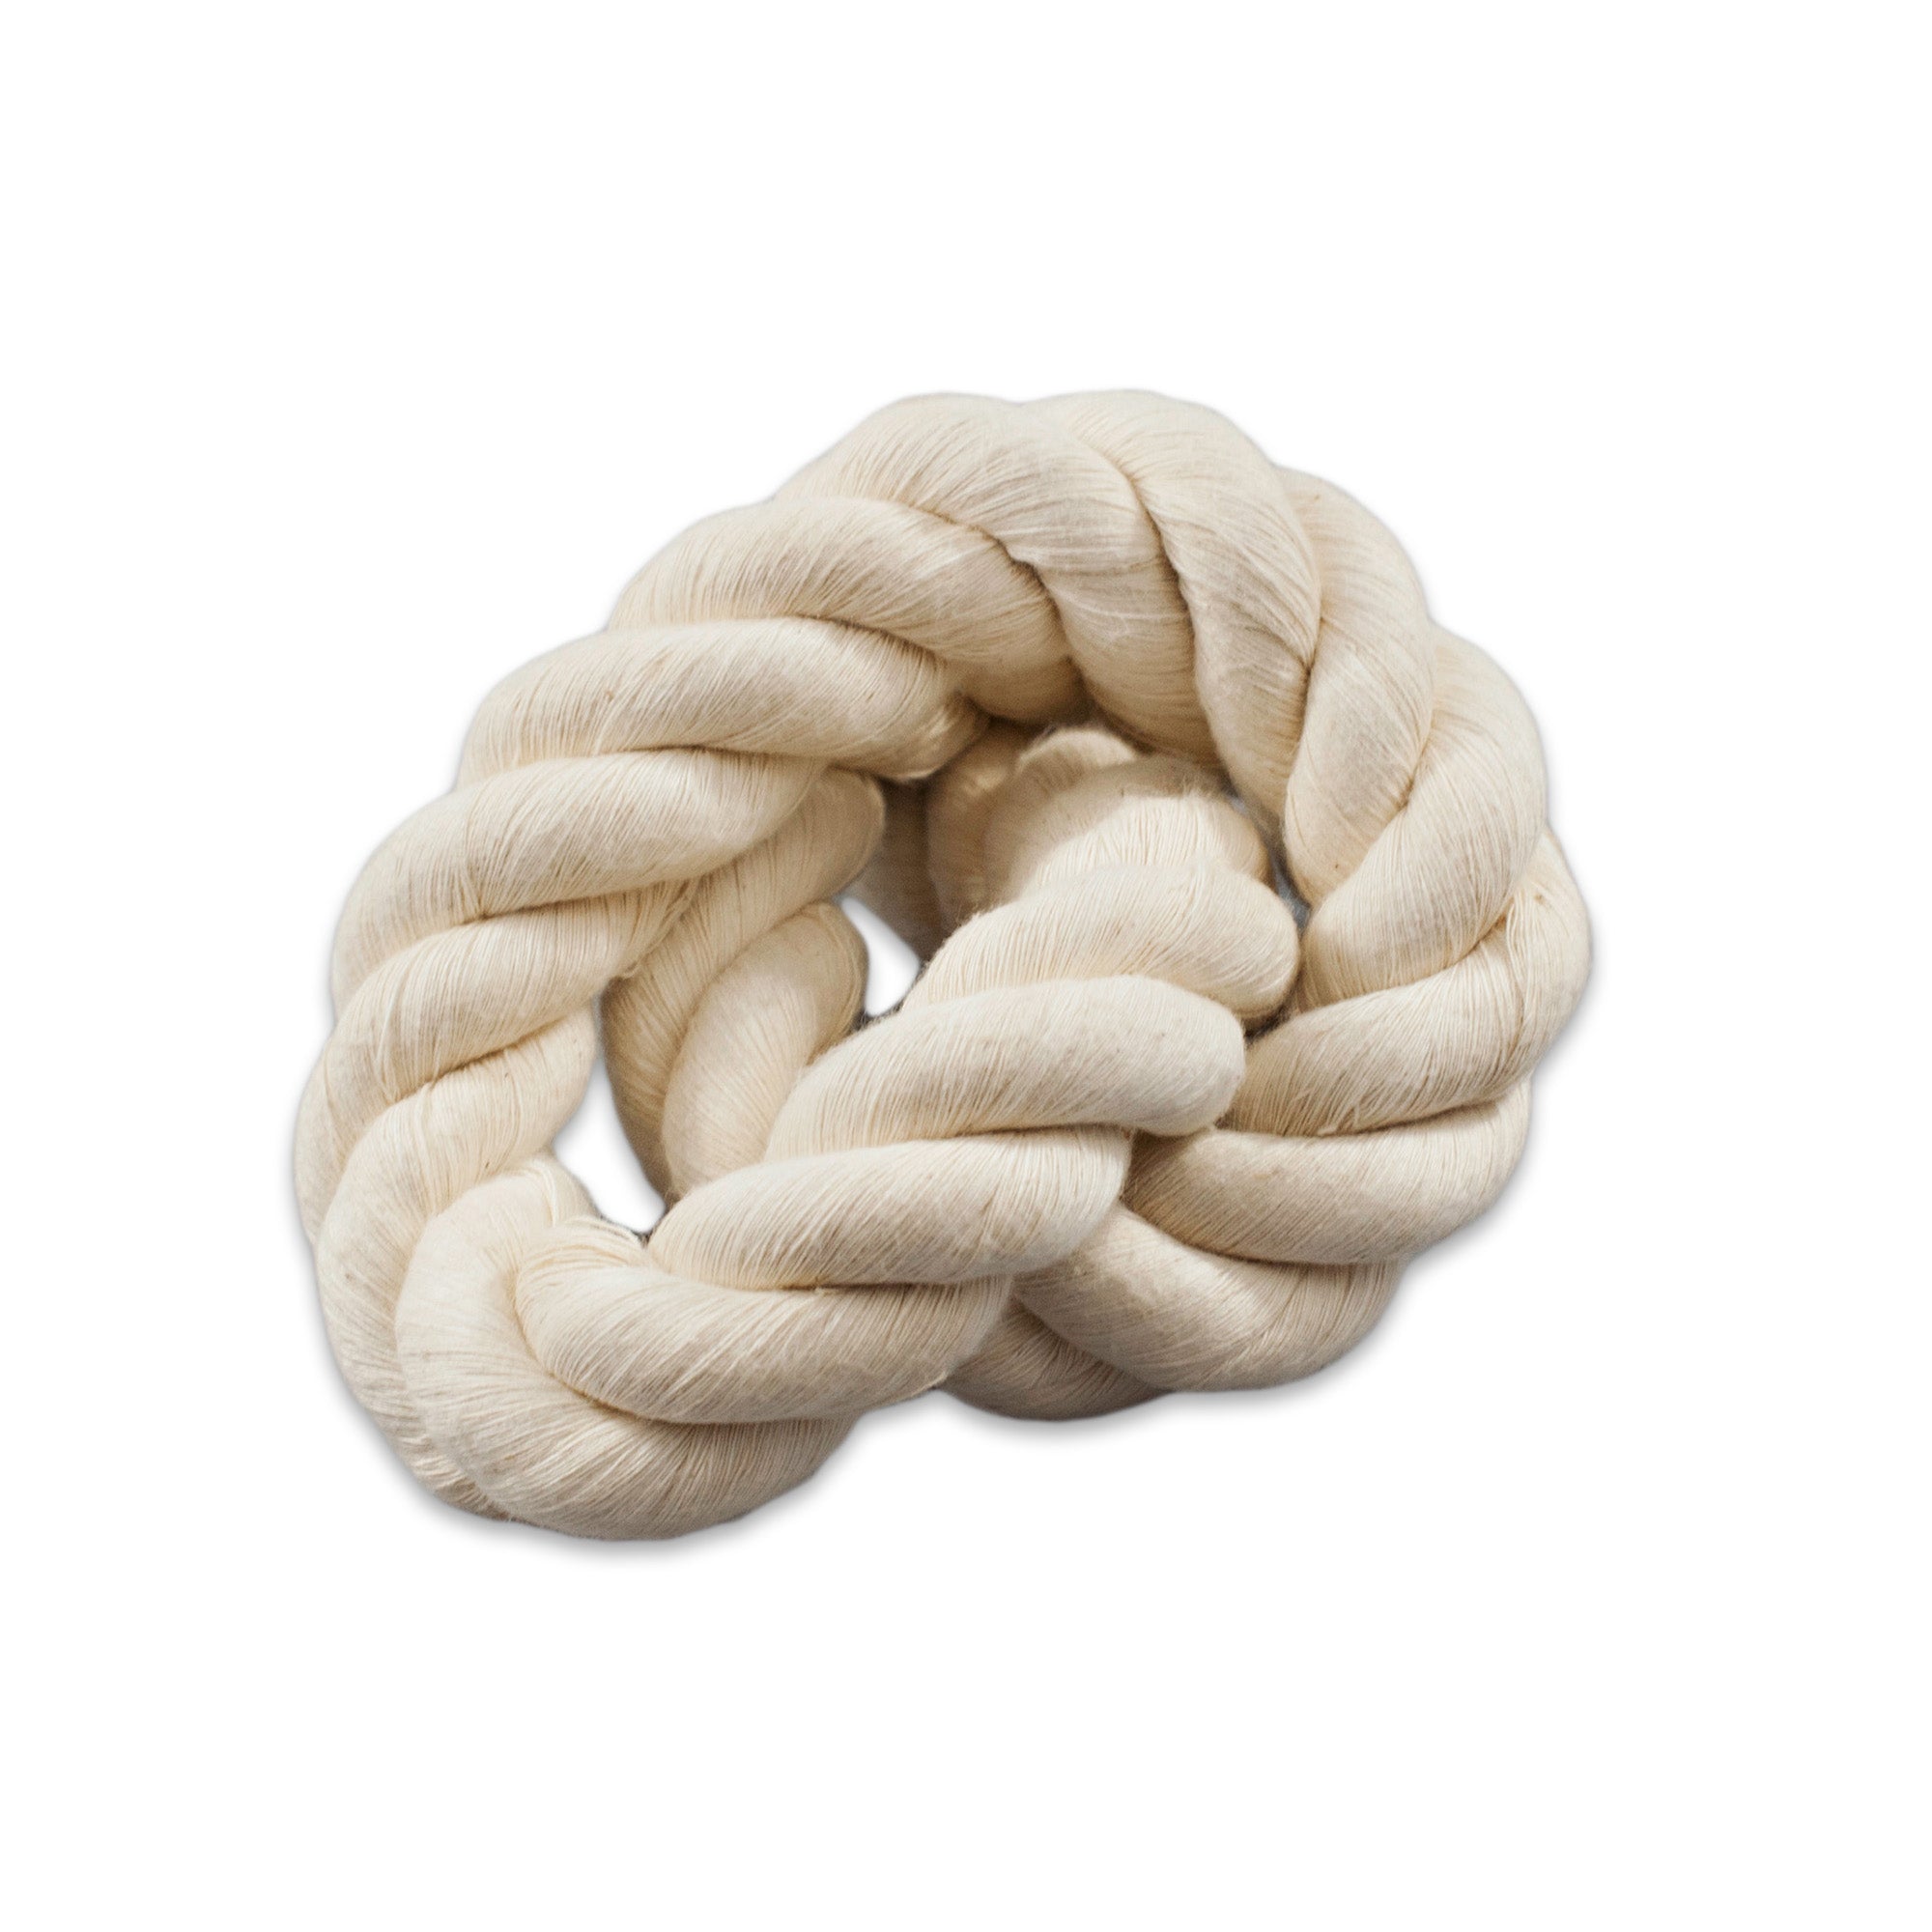 Twisted Cotton Rope, 1-1/4 inch, 3 Strand, Natural – Casket Builder Supply